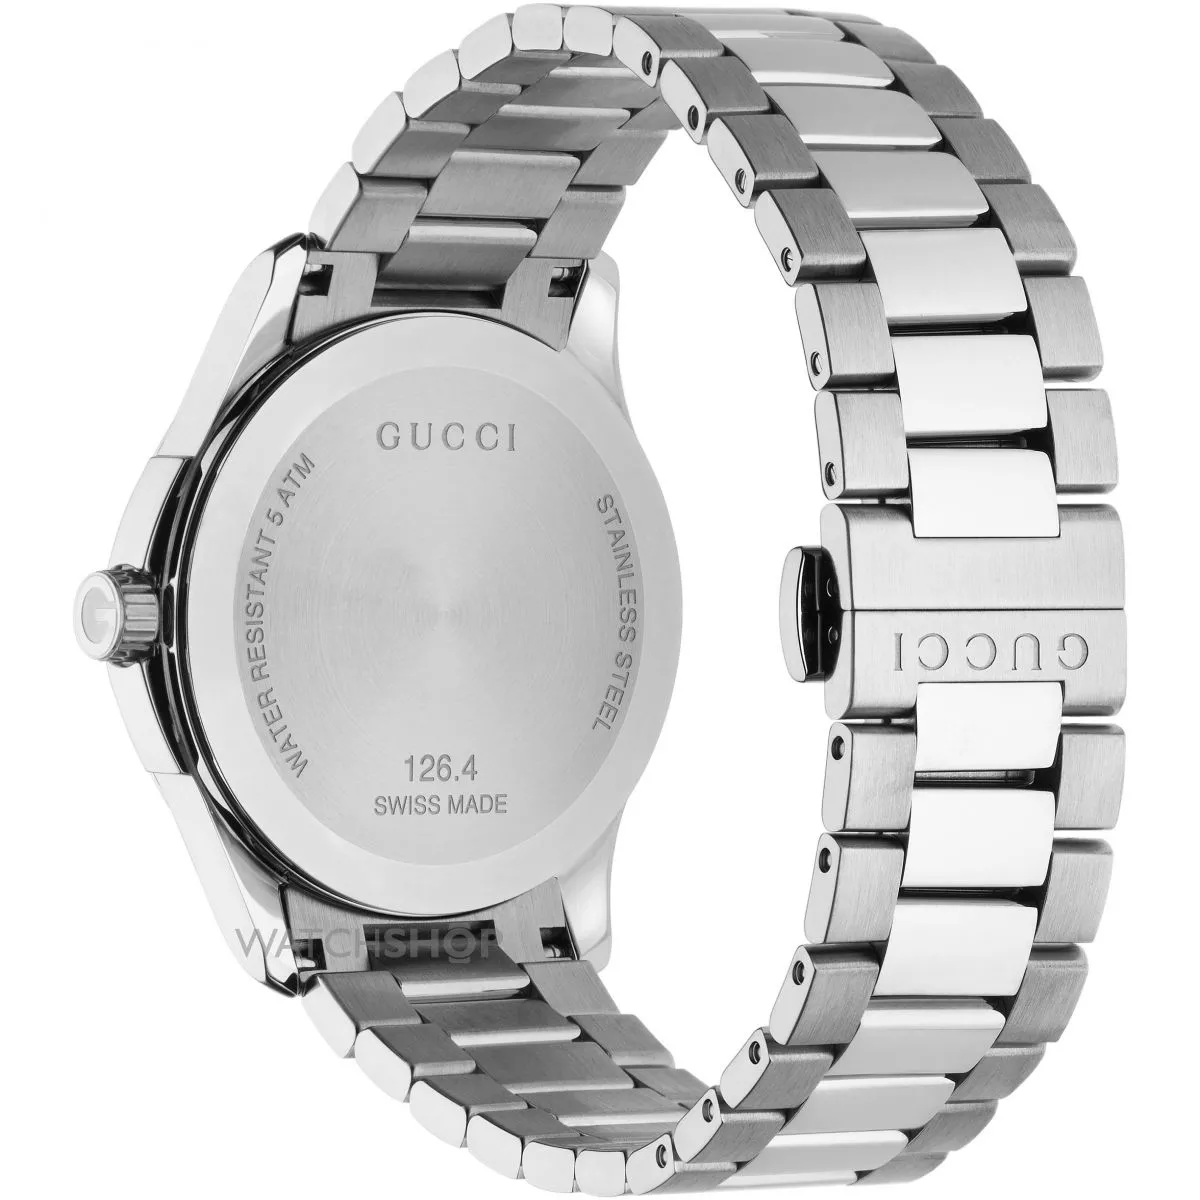 GUCCI G-Timeless Black Dial Unisex Watch 38mm